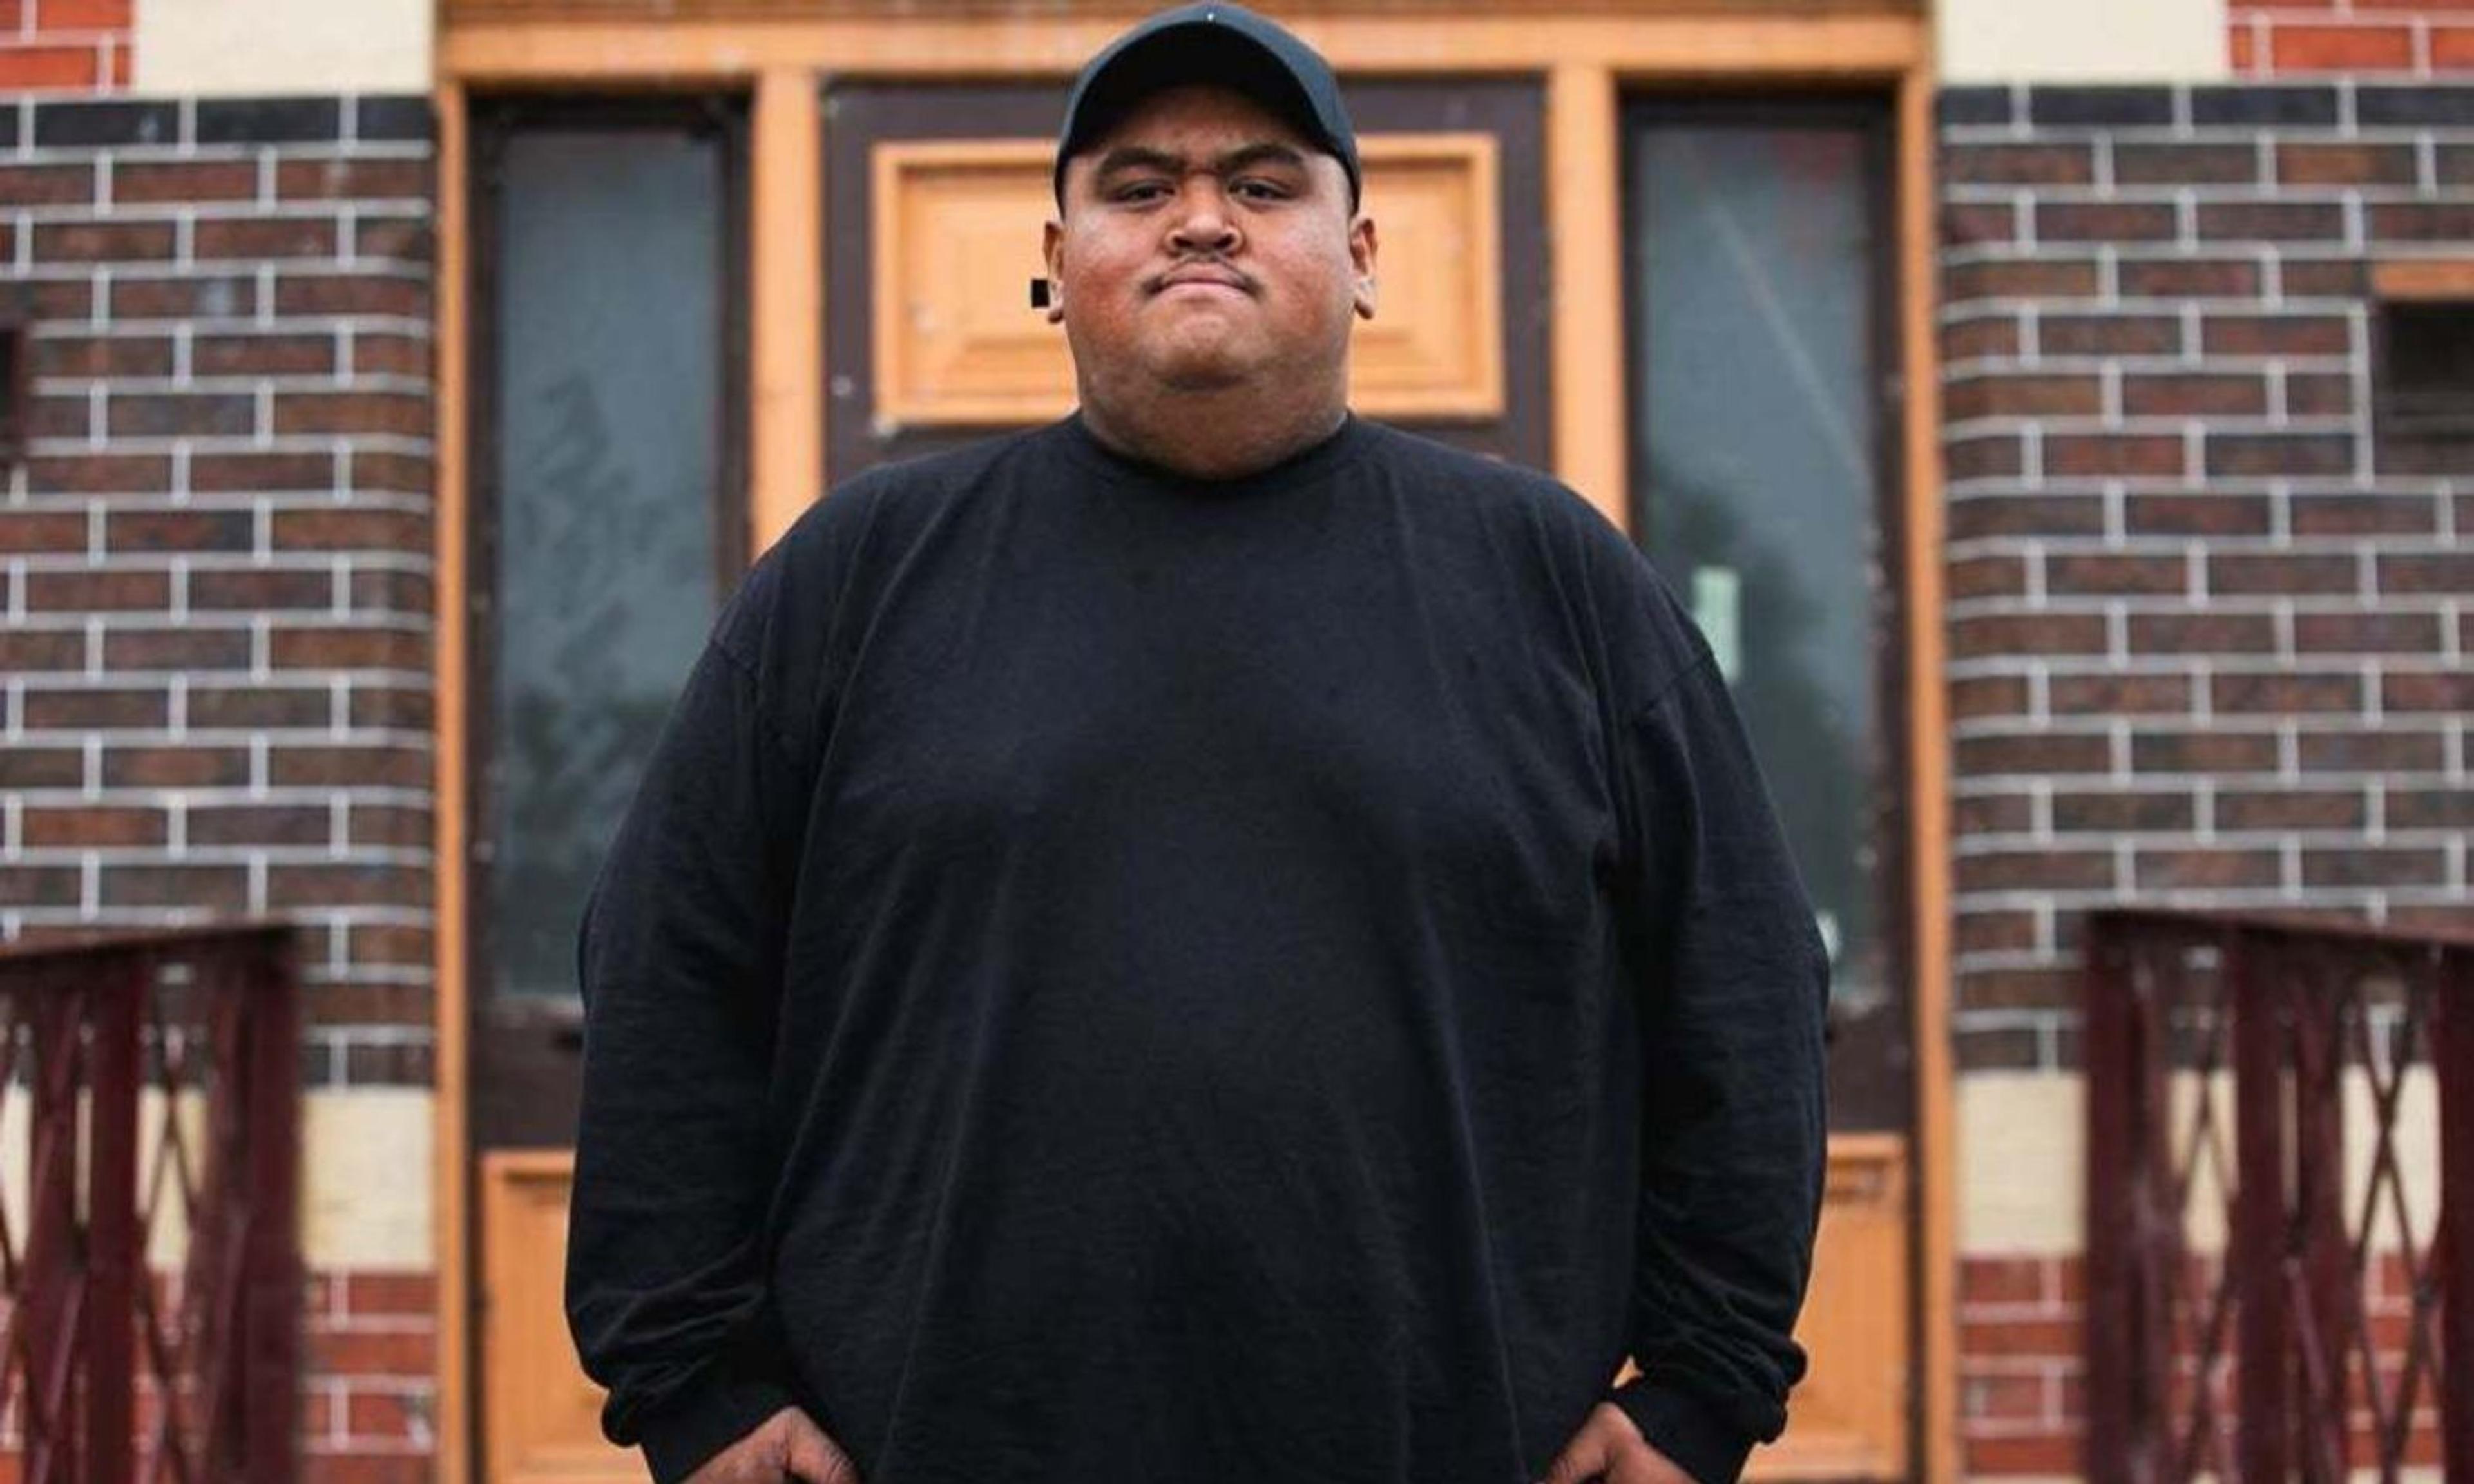 Social media influencer Uce Gang shot to fame with his comedy skits about growing up Sāmoan in South Auckland.